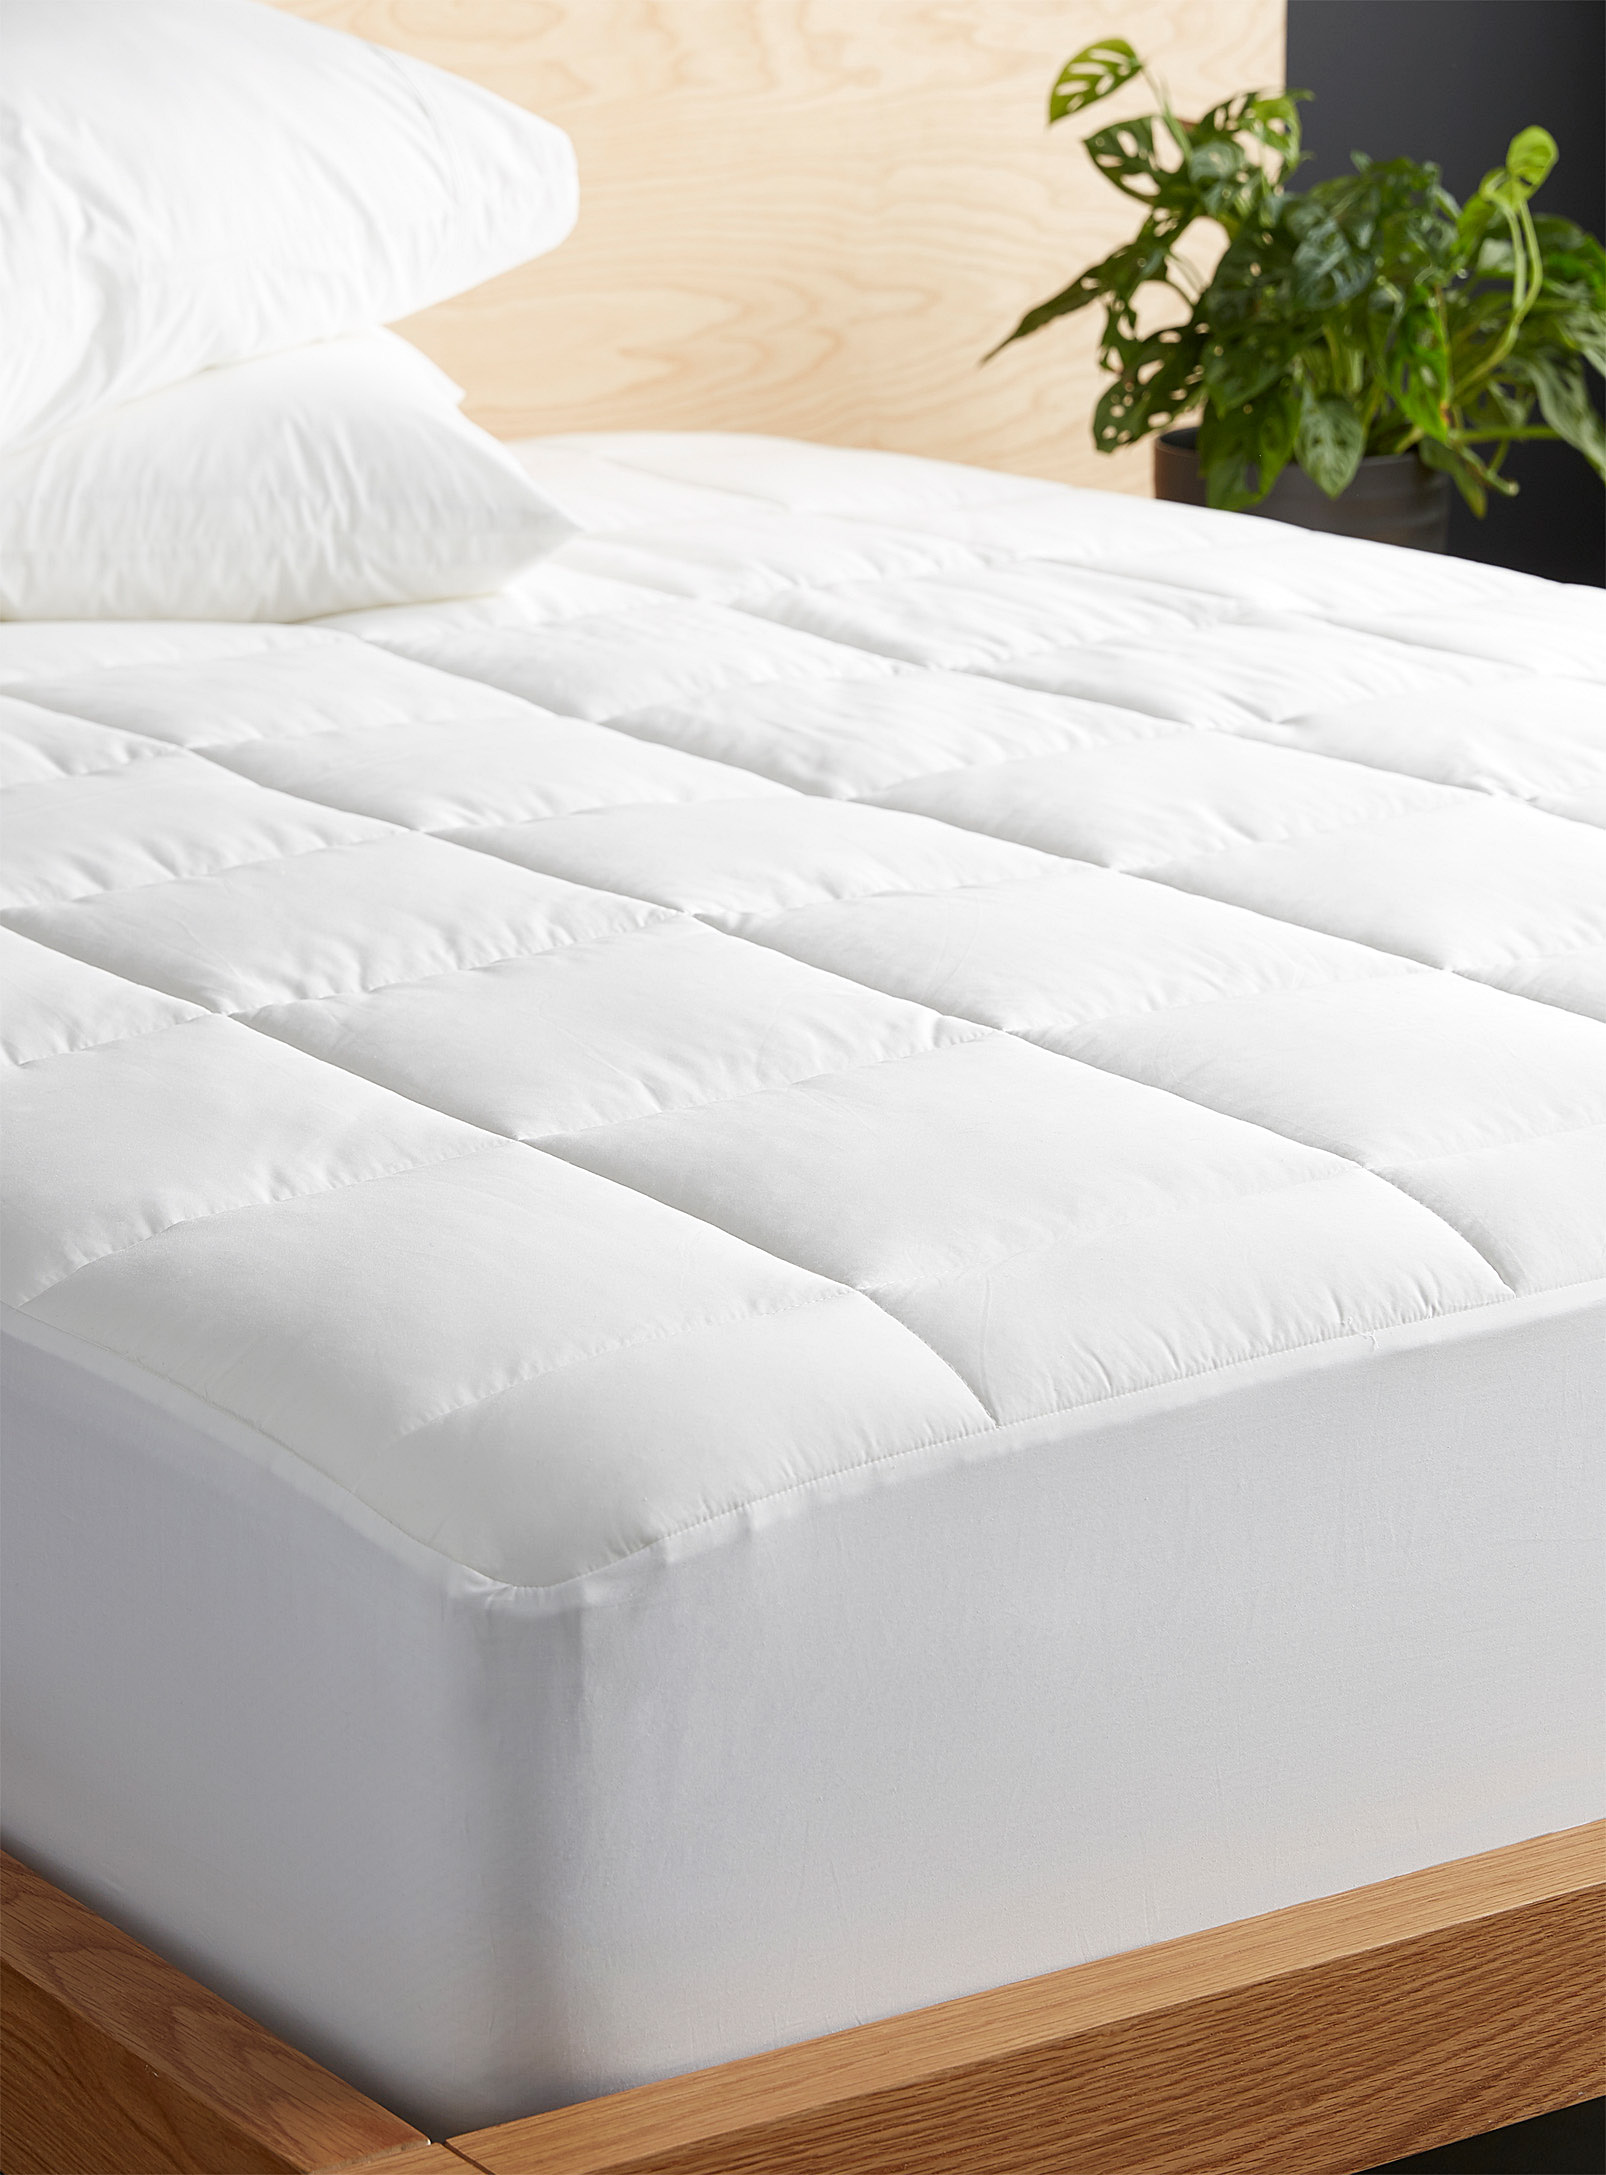 Hôtels Le Germain - Egyptian cotton& bamboo rayon mattress protector 330-thread-count